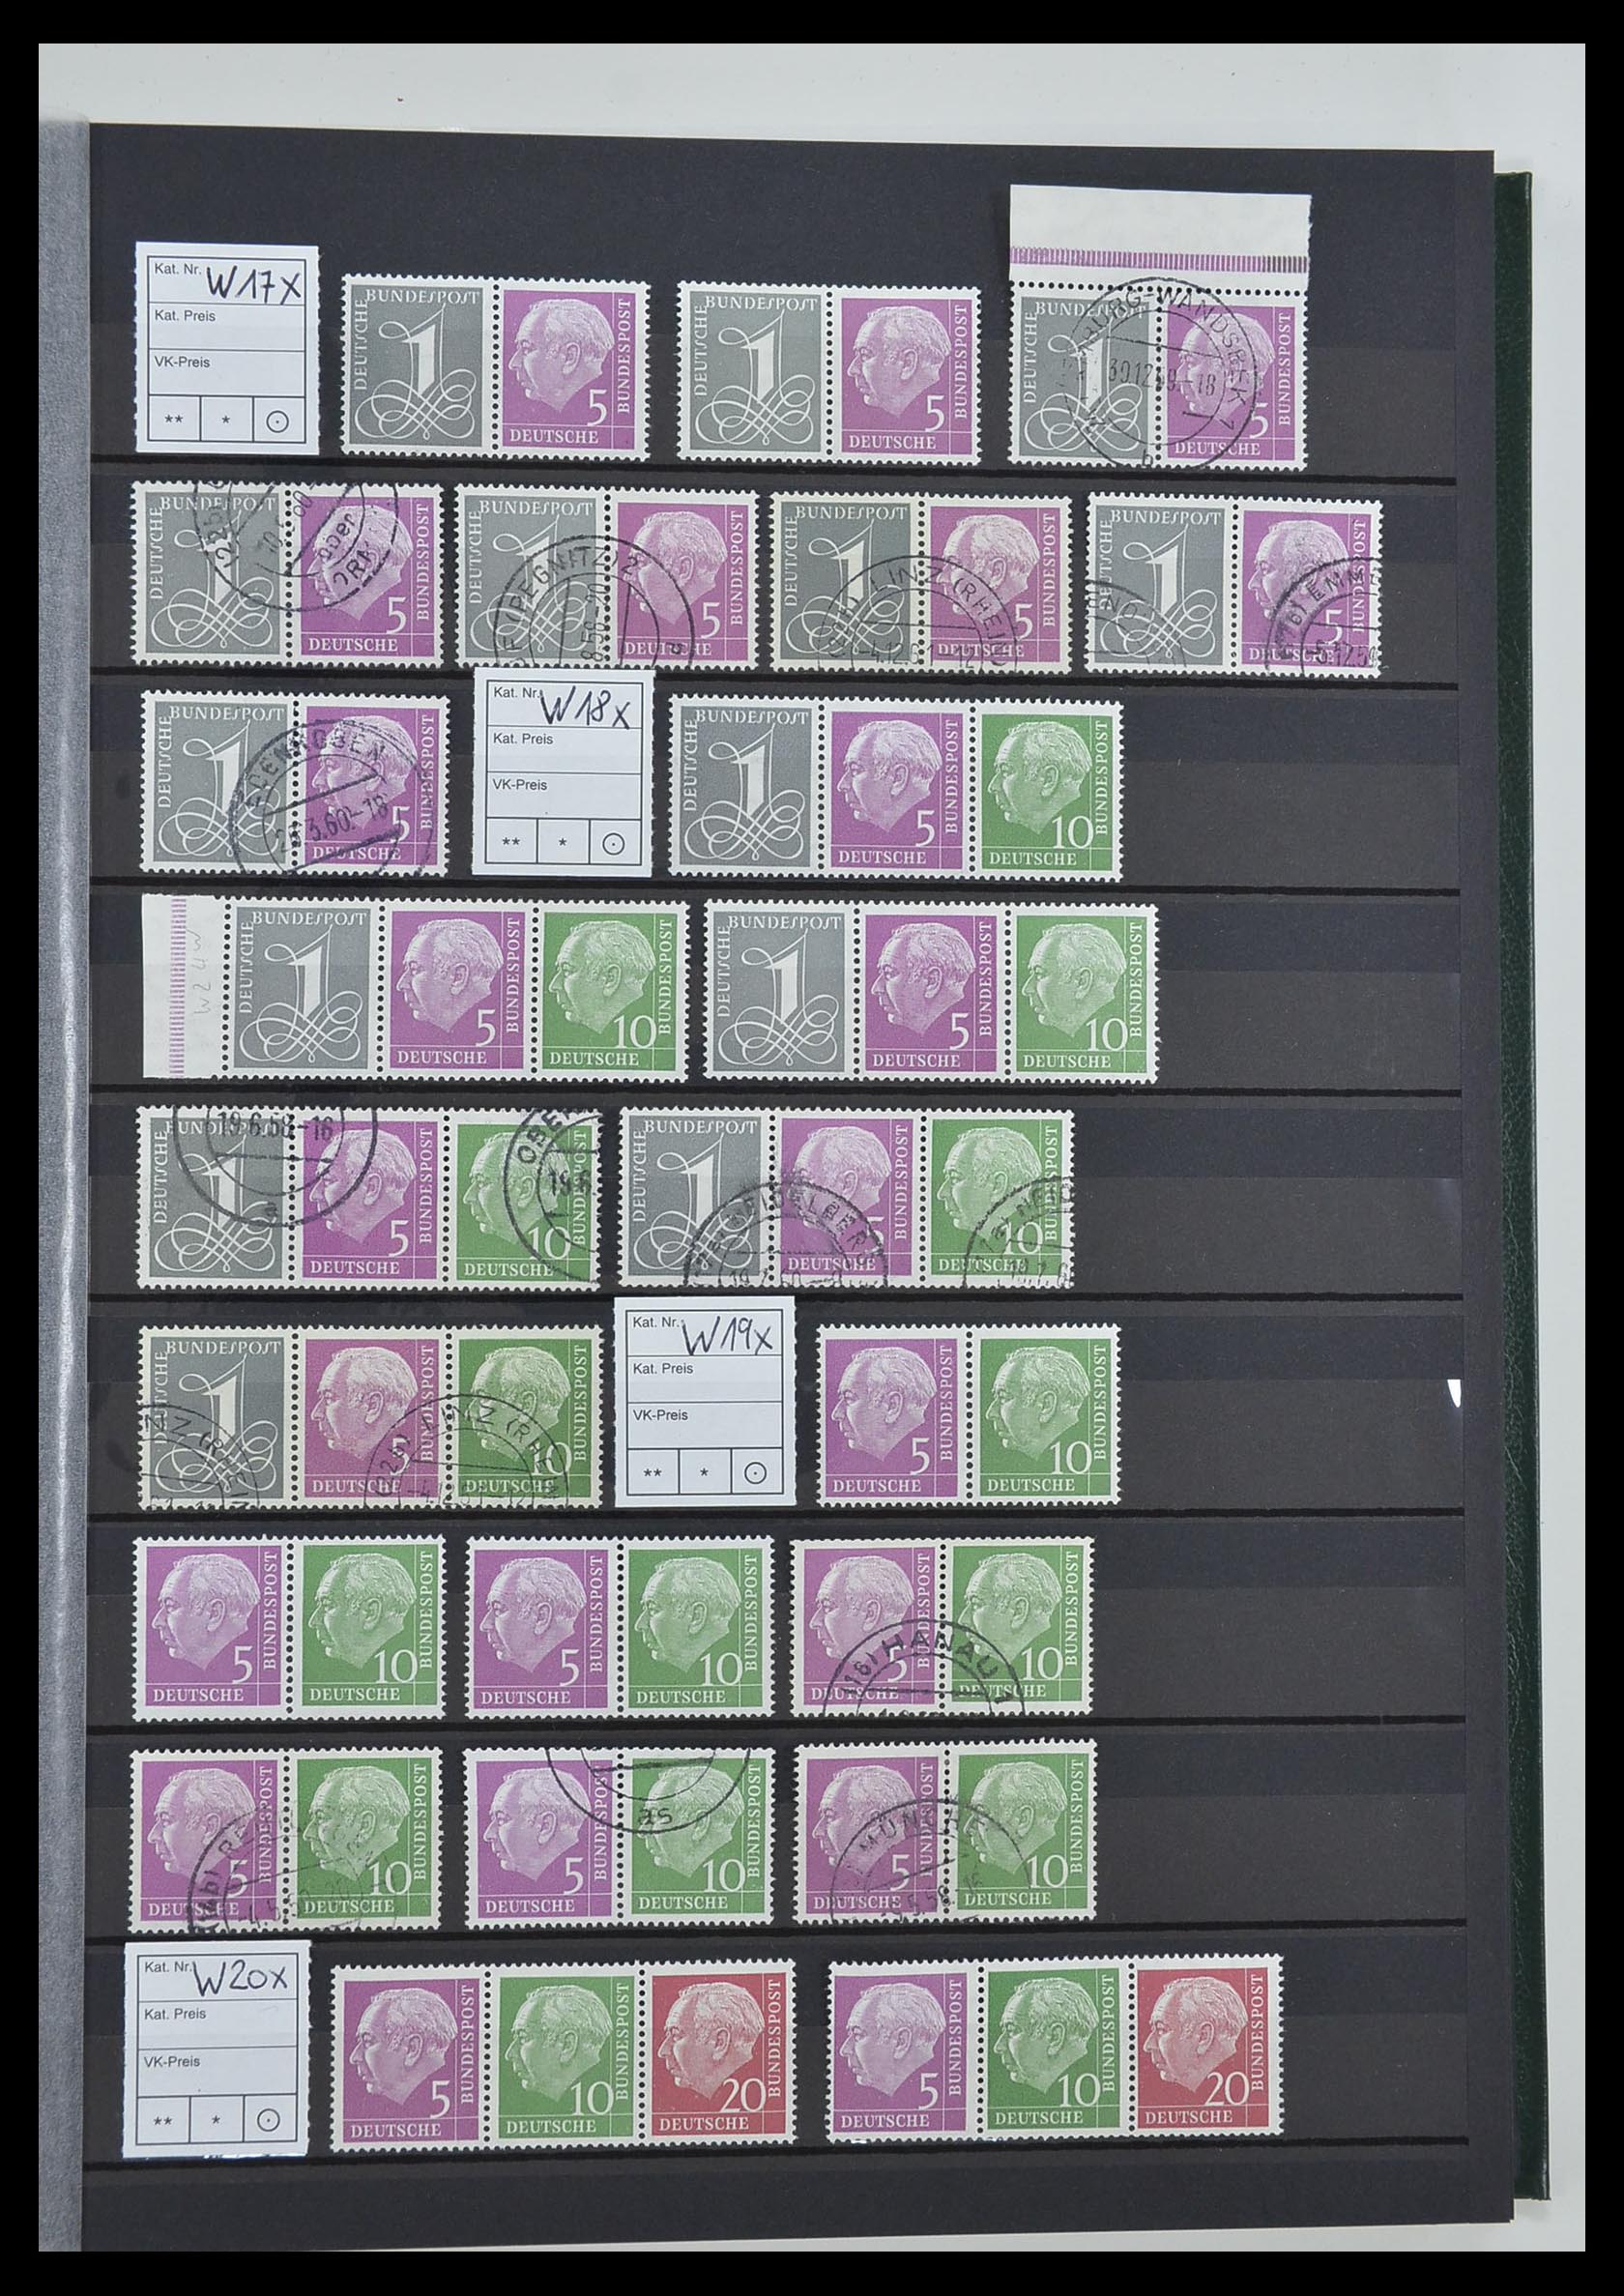 33275 019 - Stamp collection 33275 Bundespost combinations 1951-1960.